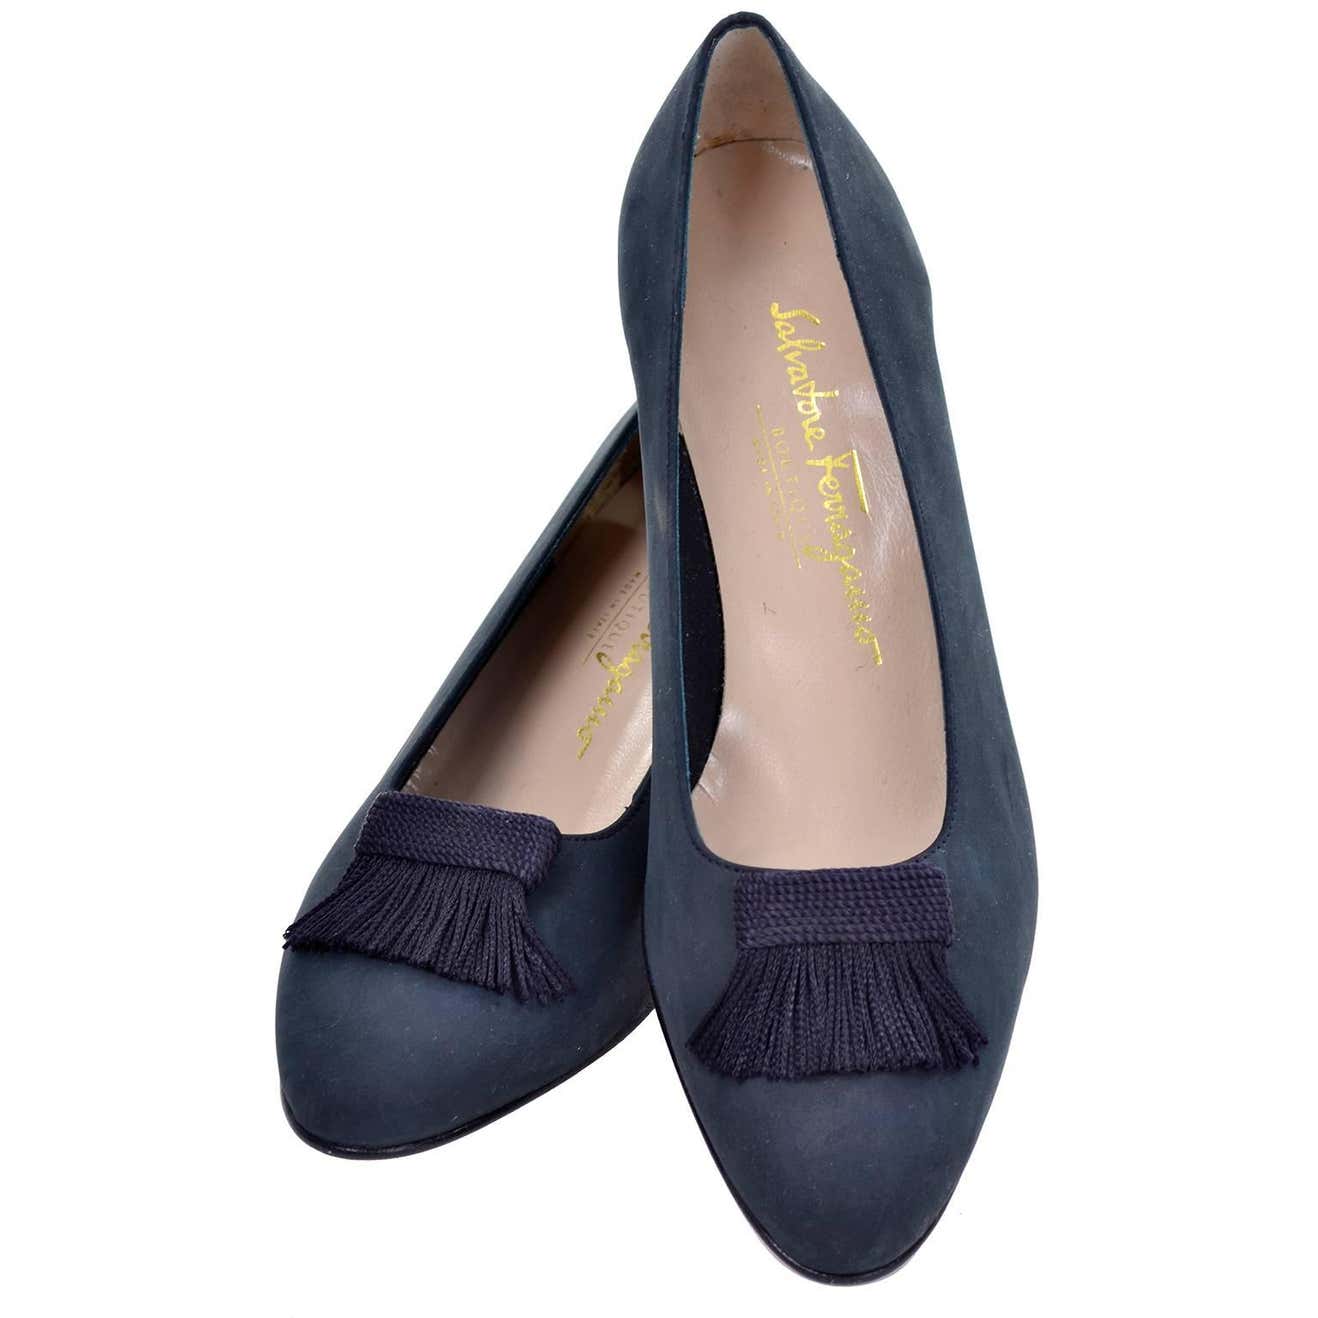 New Vintage Ferragamo Shoes in Navy Blue Suede with Fringed Tassels ...